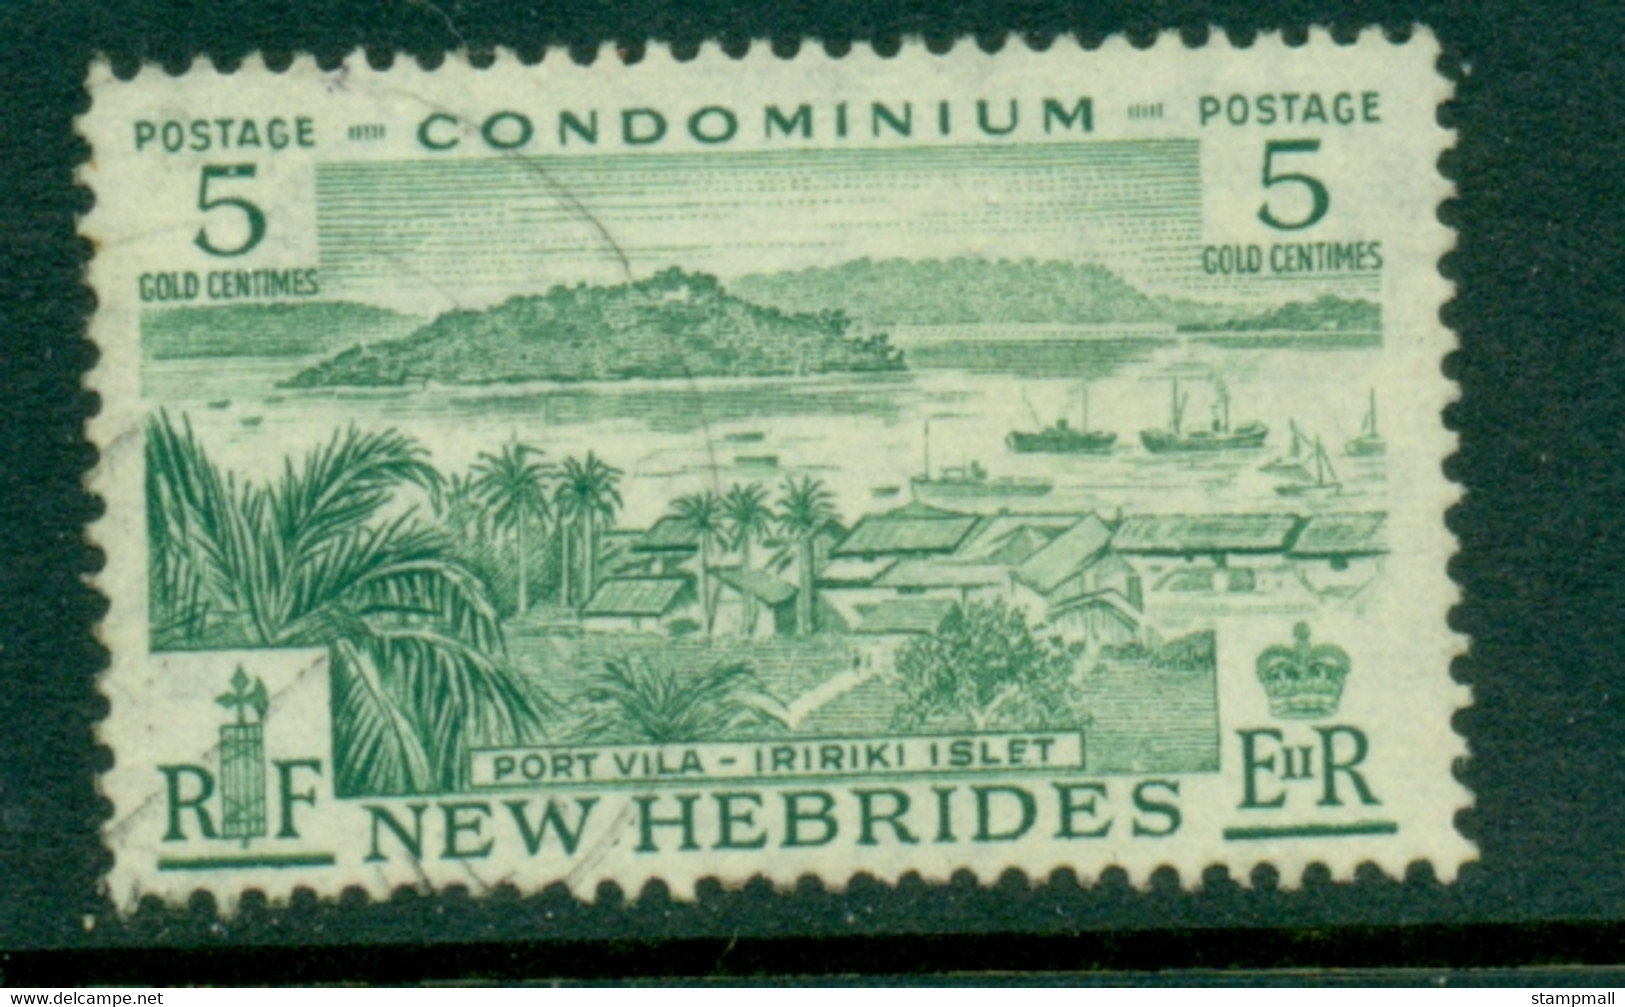 New Hebrides (Br) 1957 Pictorial 5c FU - Used Stamps